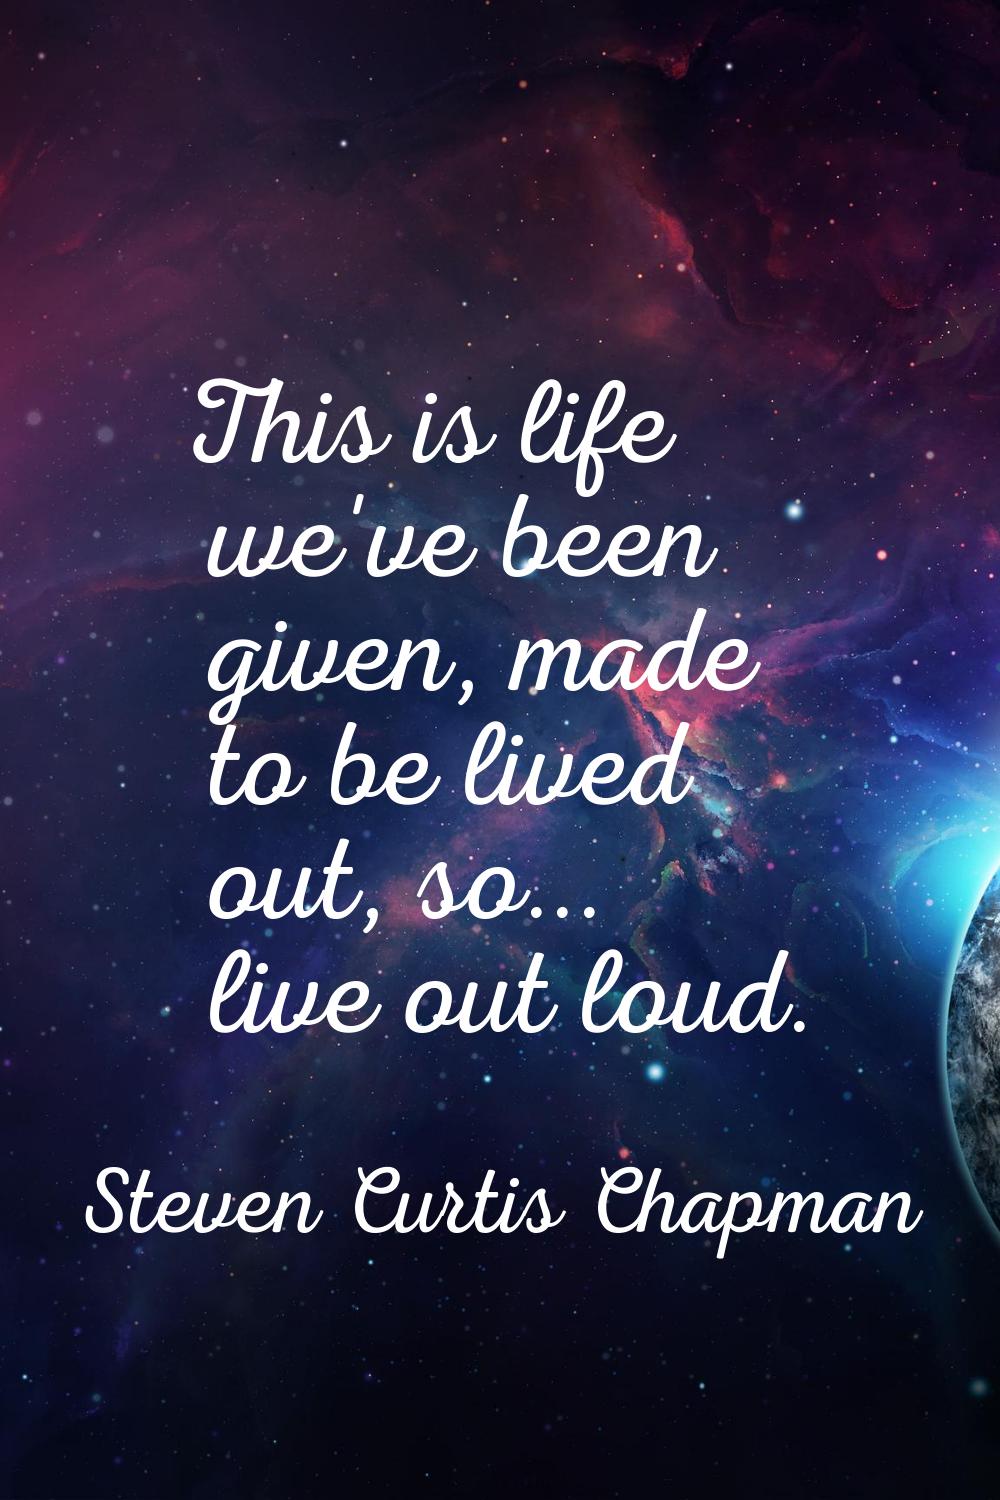 This is life we've been given, made to be lived out, so... live out loud.